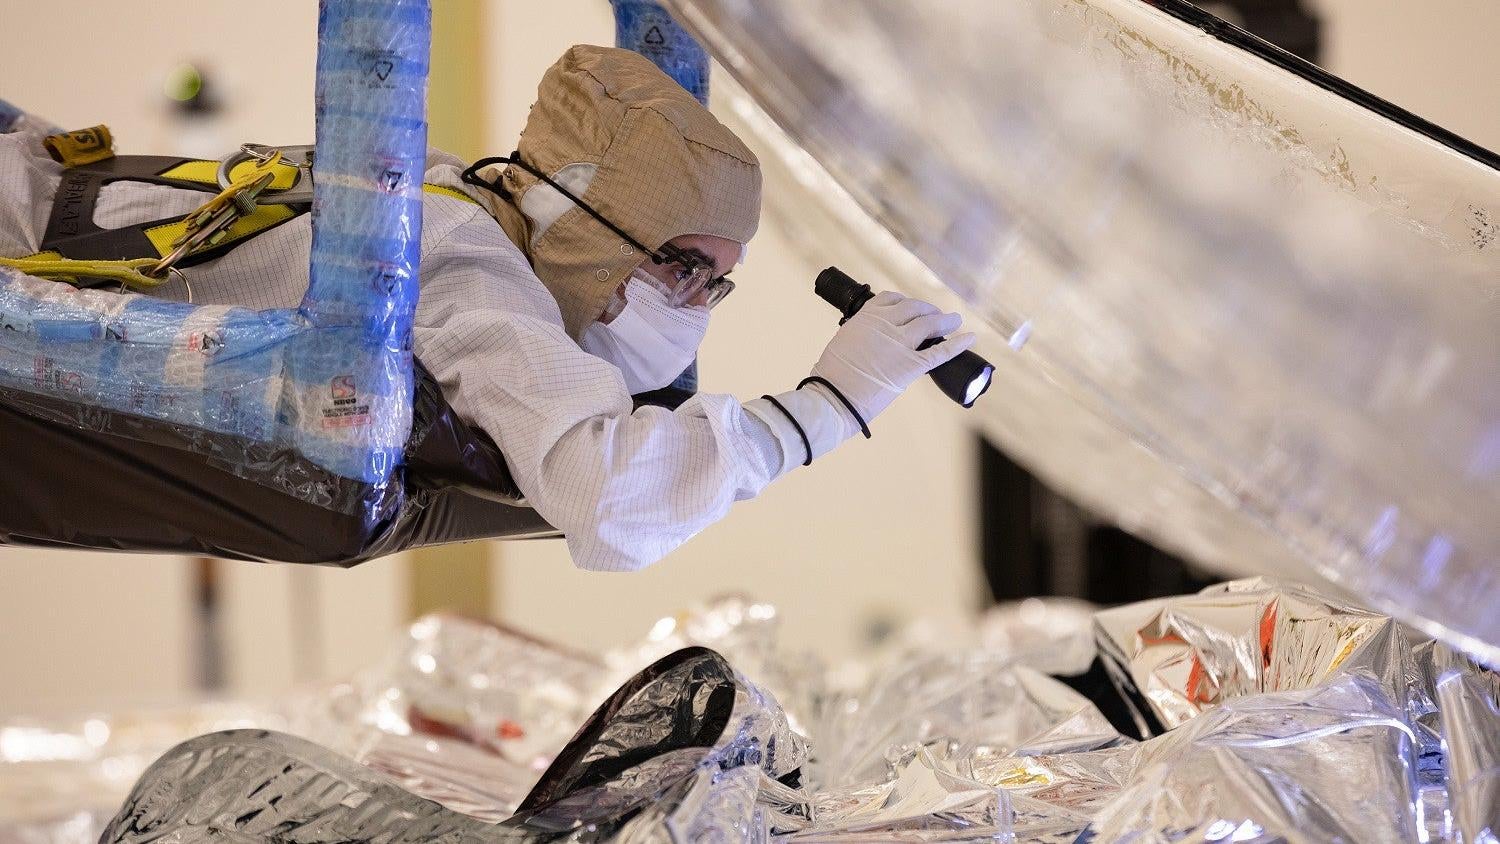 Archival image from February 2021, showing a Northrop Grumman technician inspecting the folding and packing of the Webb Space Telescope's sunshield.  (Photo: Northrop Grumman, Fair Use)